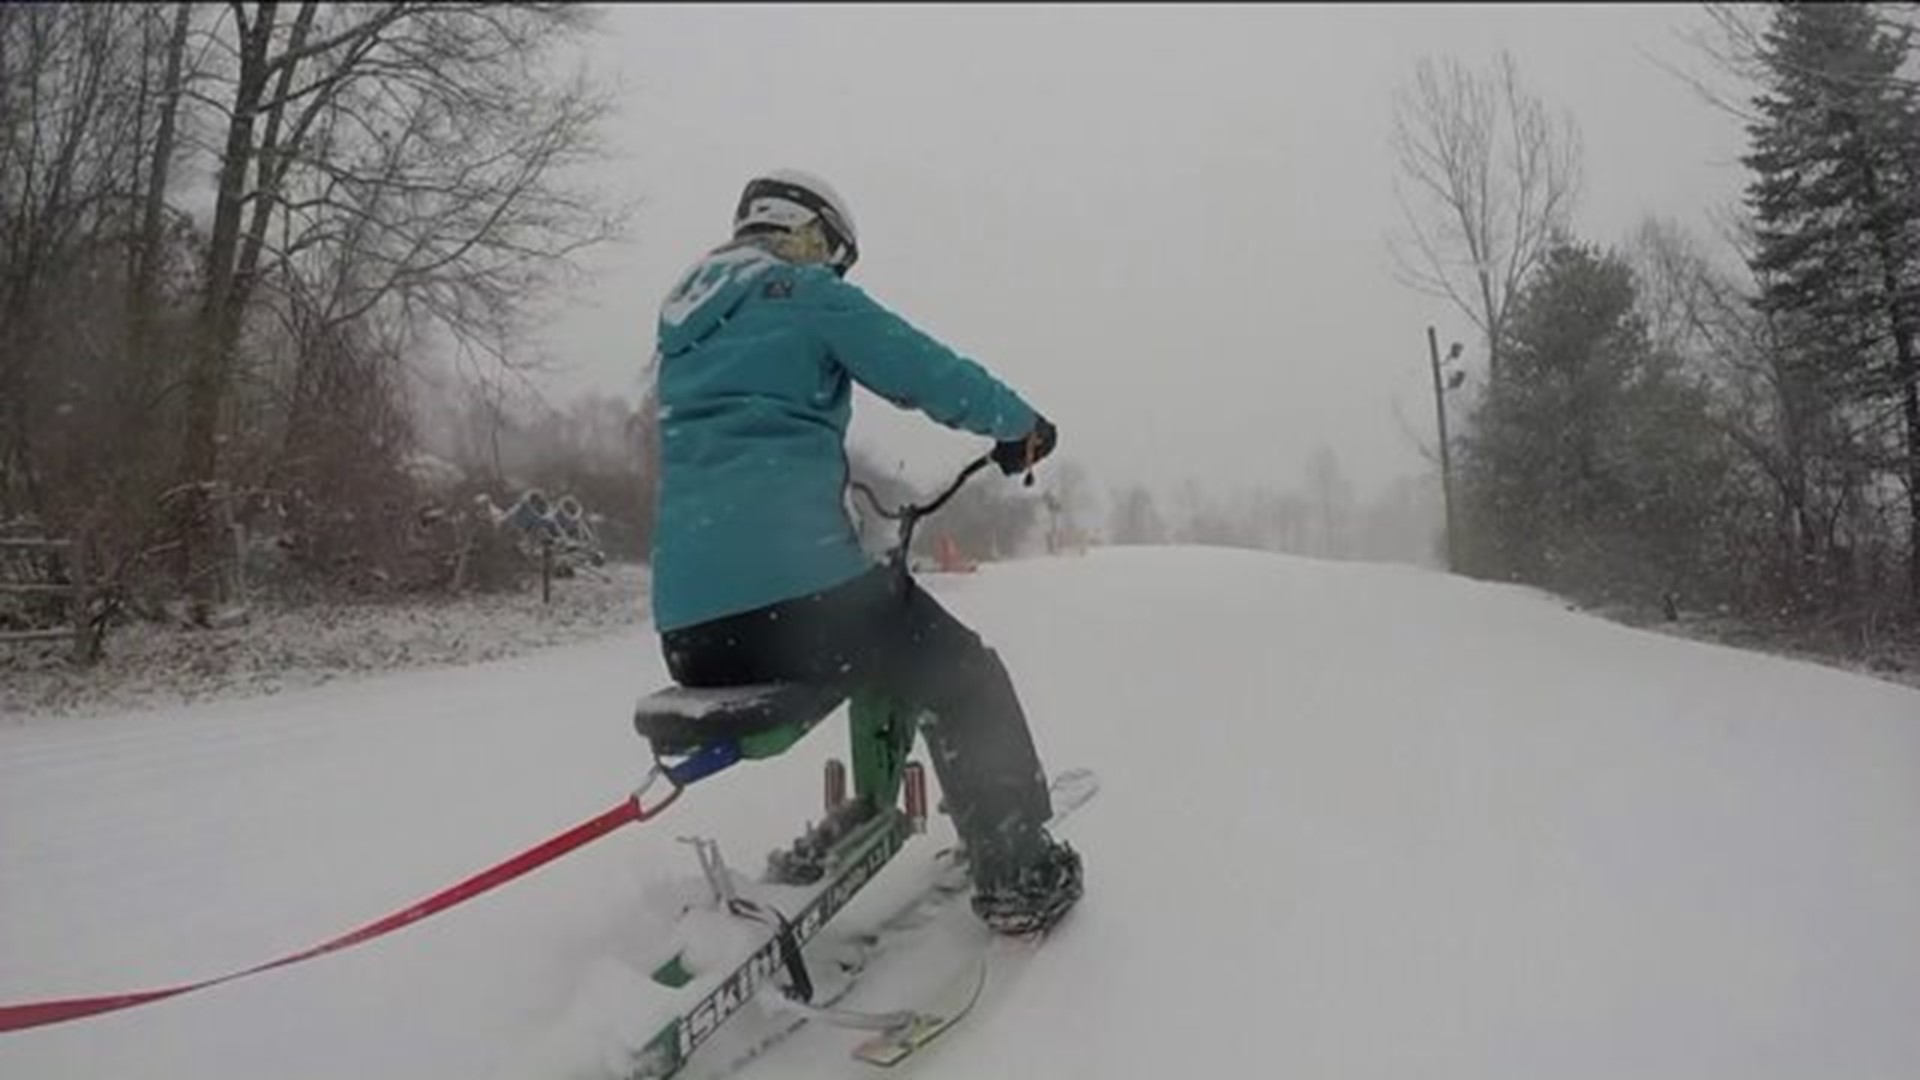 Adaptive skiing helps more people get out on the slopes